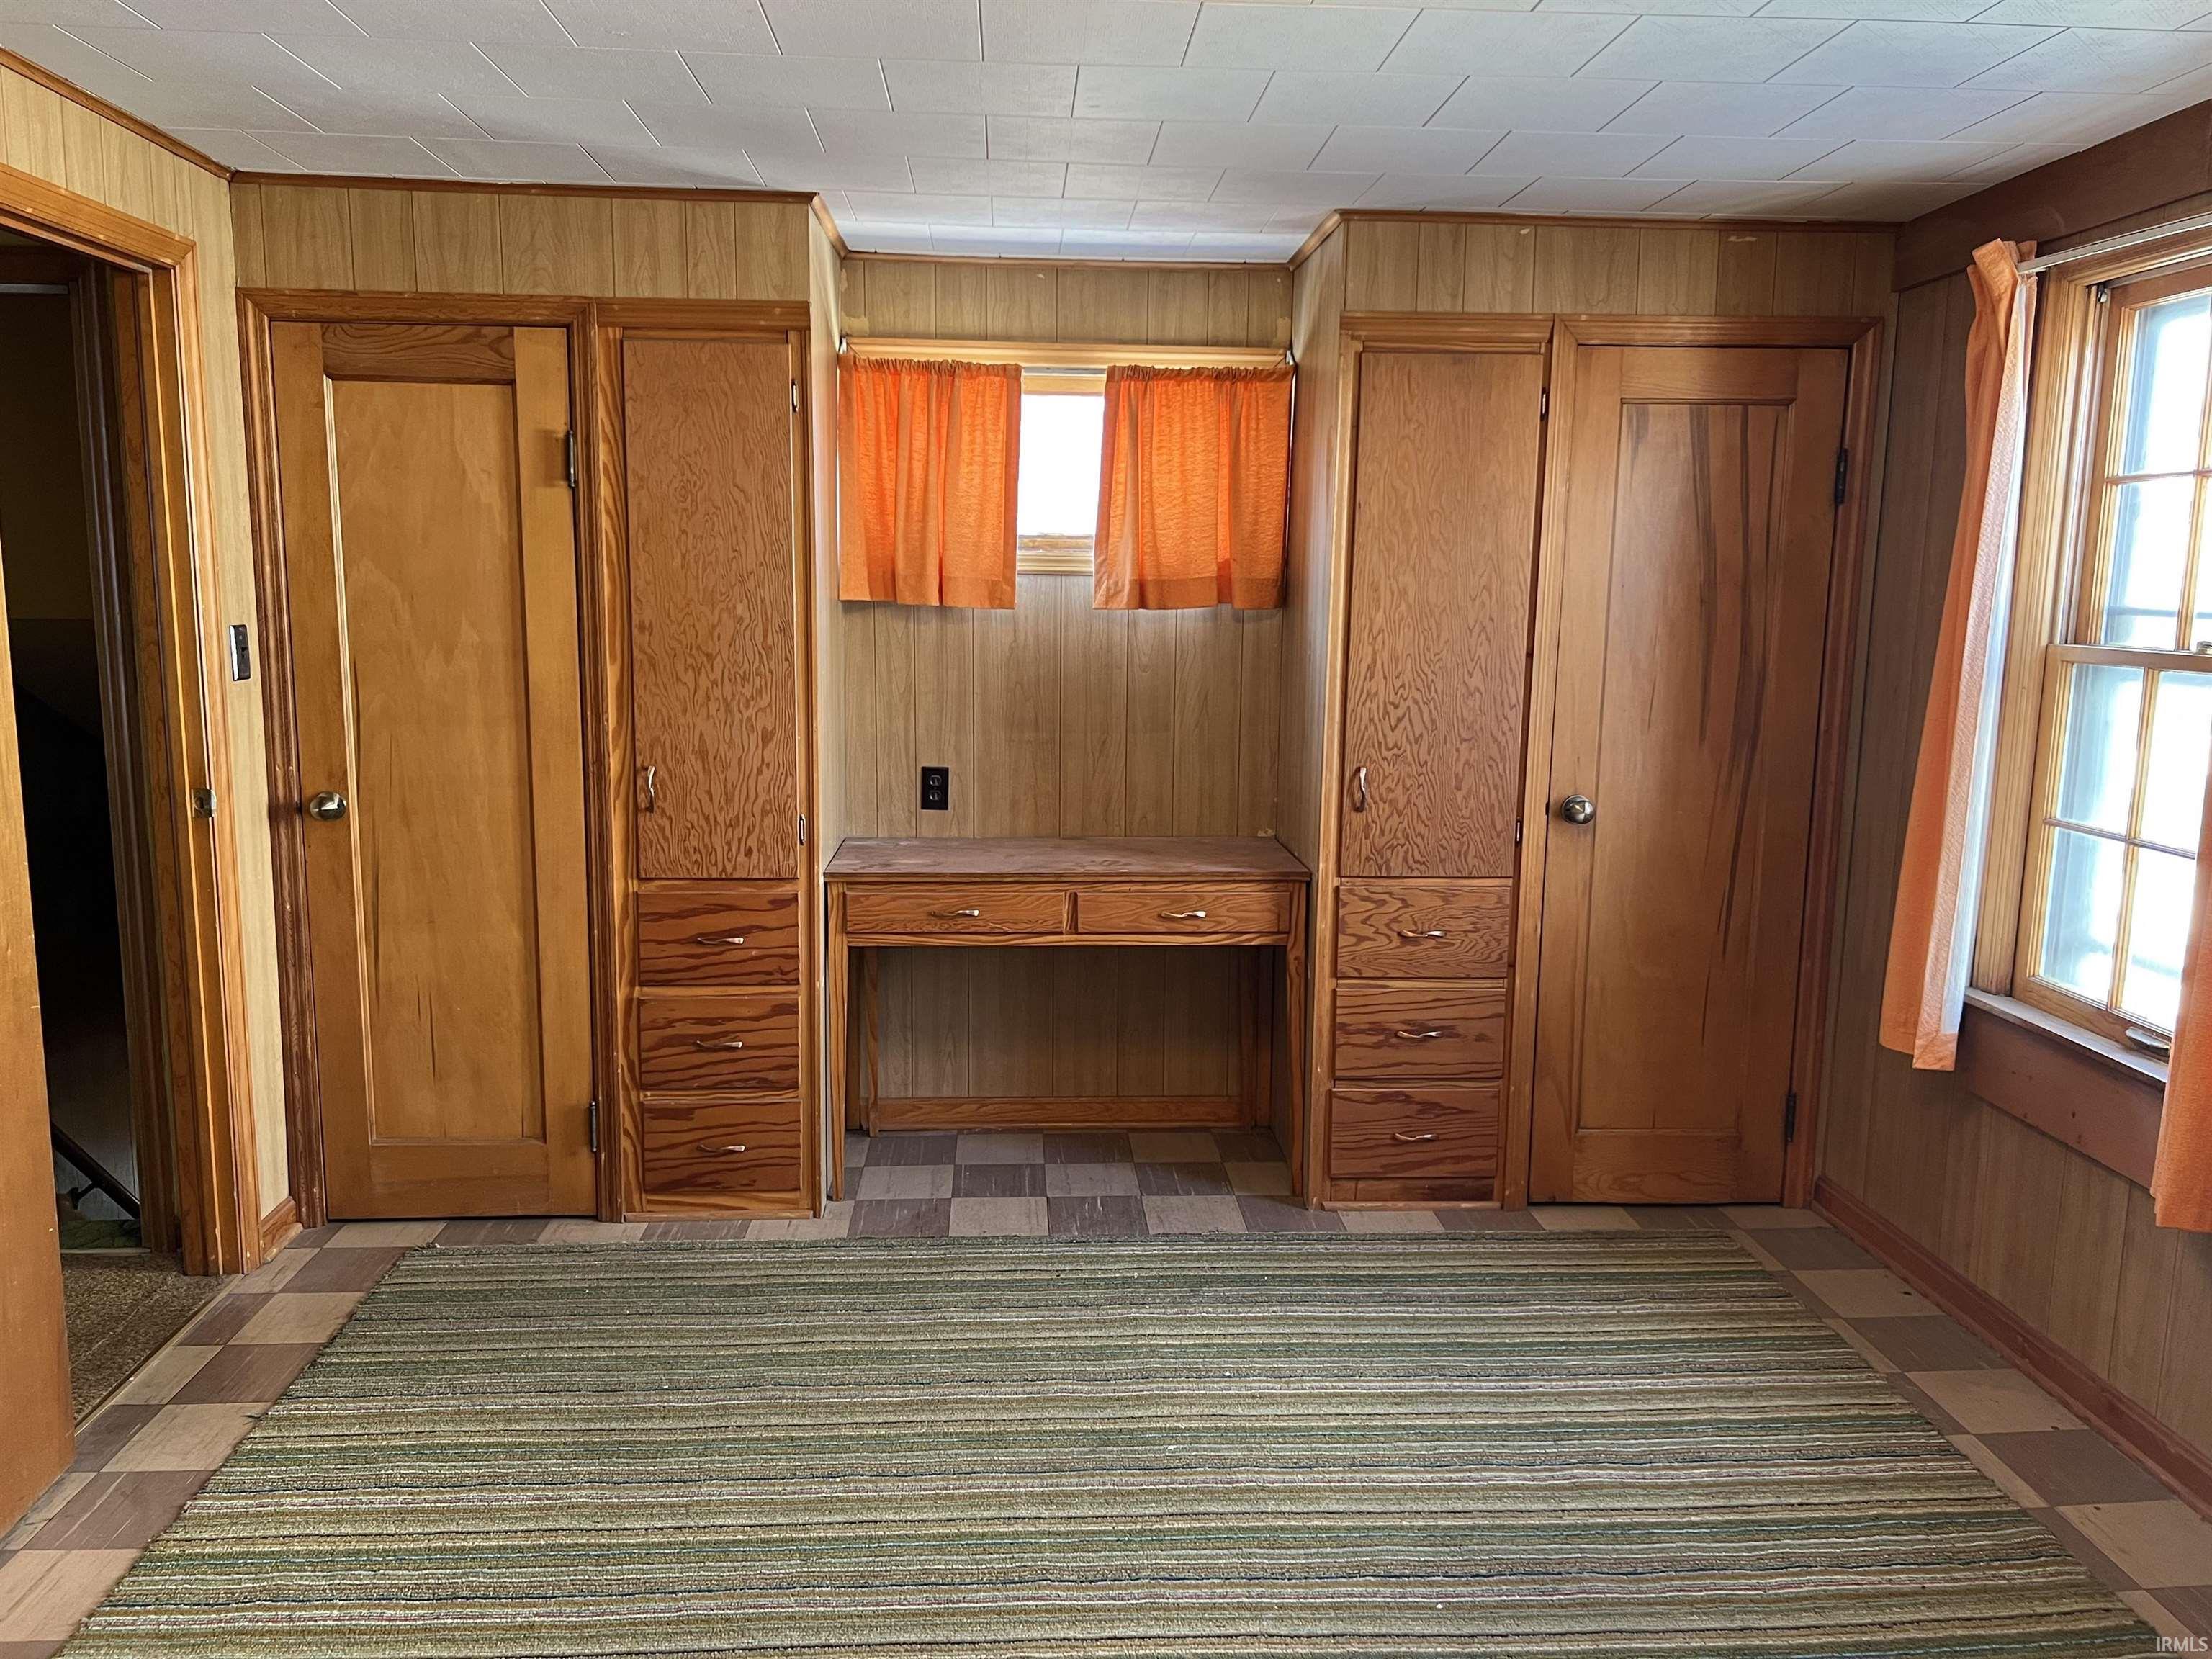 Upstairs are 4 Additional Bedrooms with some desks and cubbies, a Full Bath, and a second Half Bath.